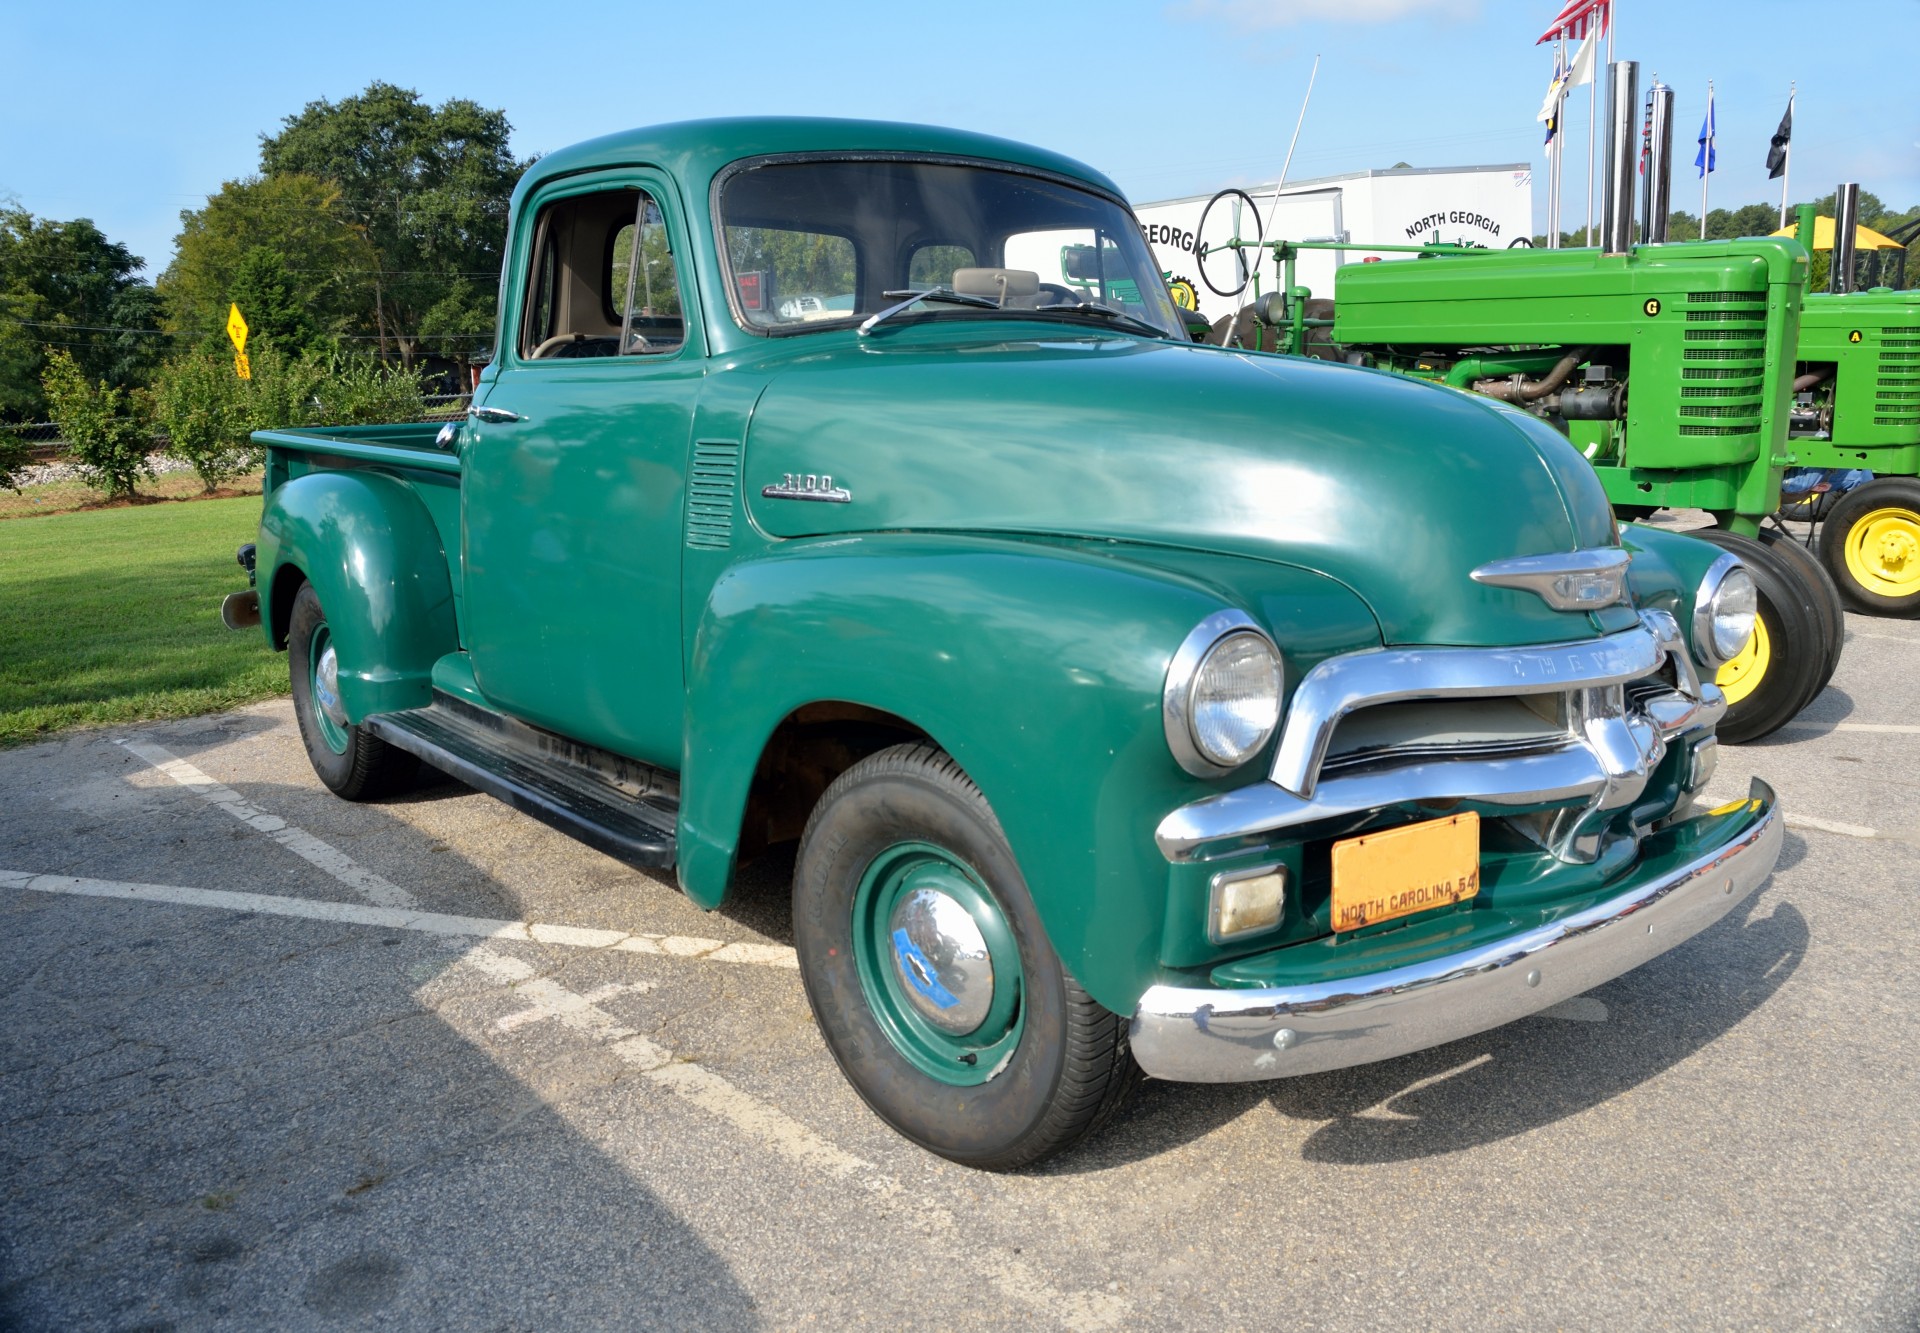 Old green Chevy Truck